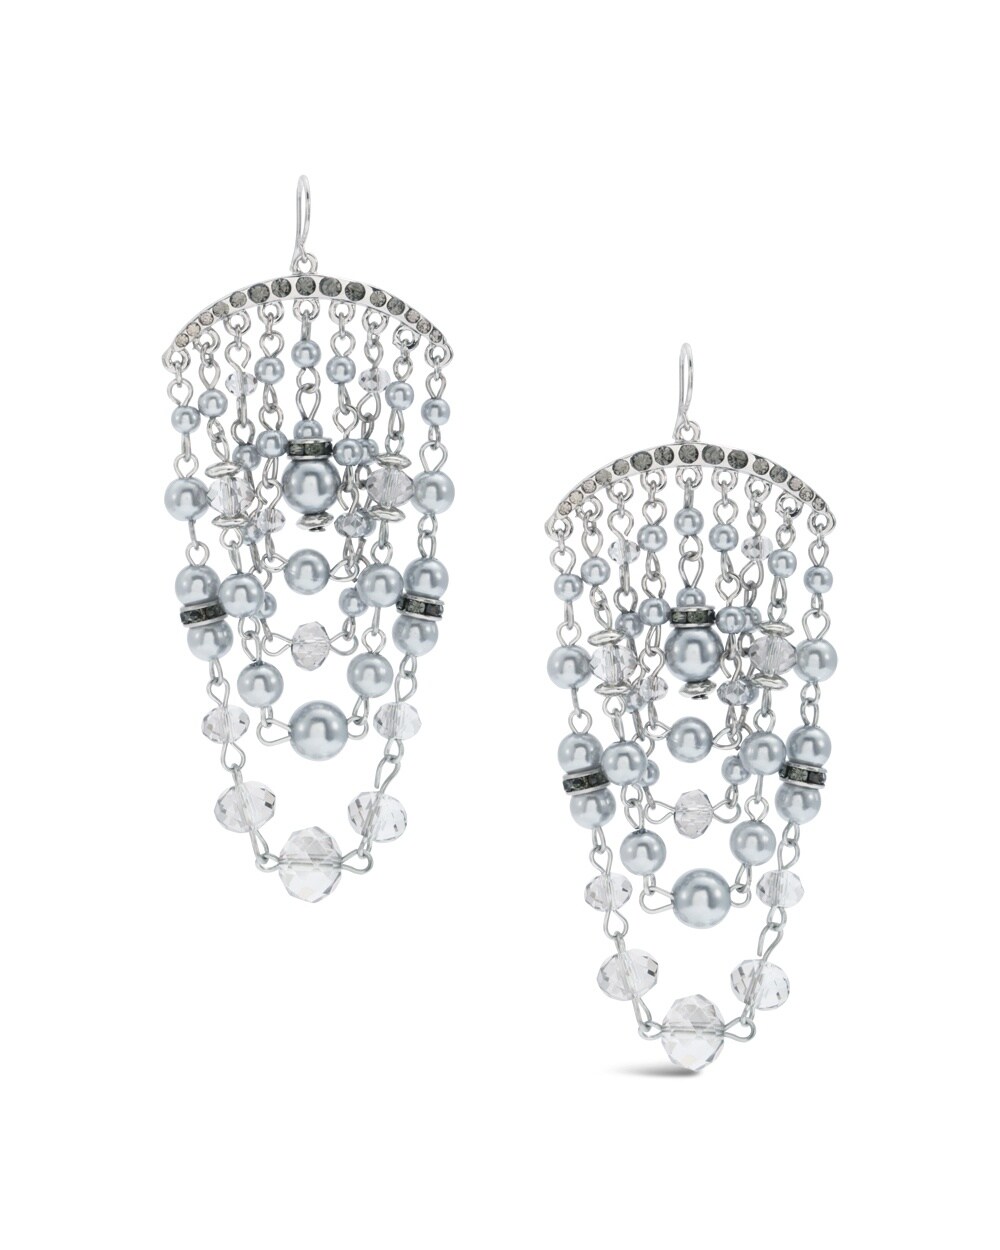 Collectibles Premiere Chandelier Earrings